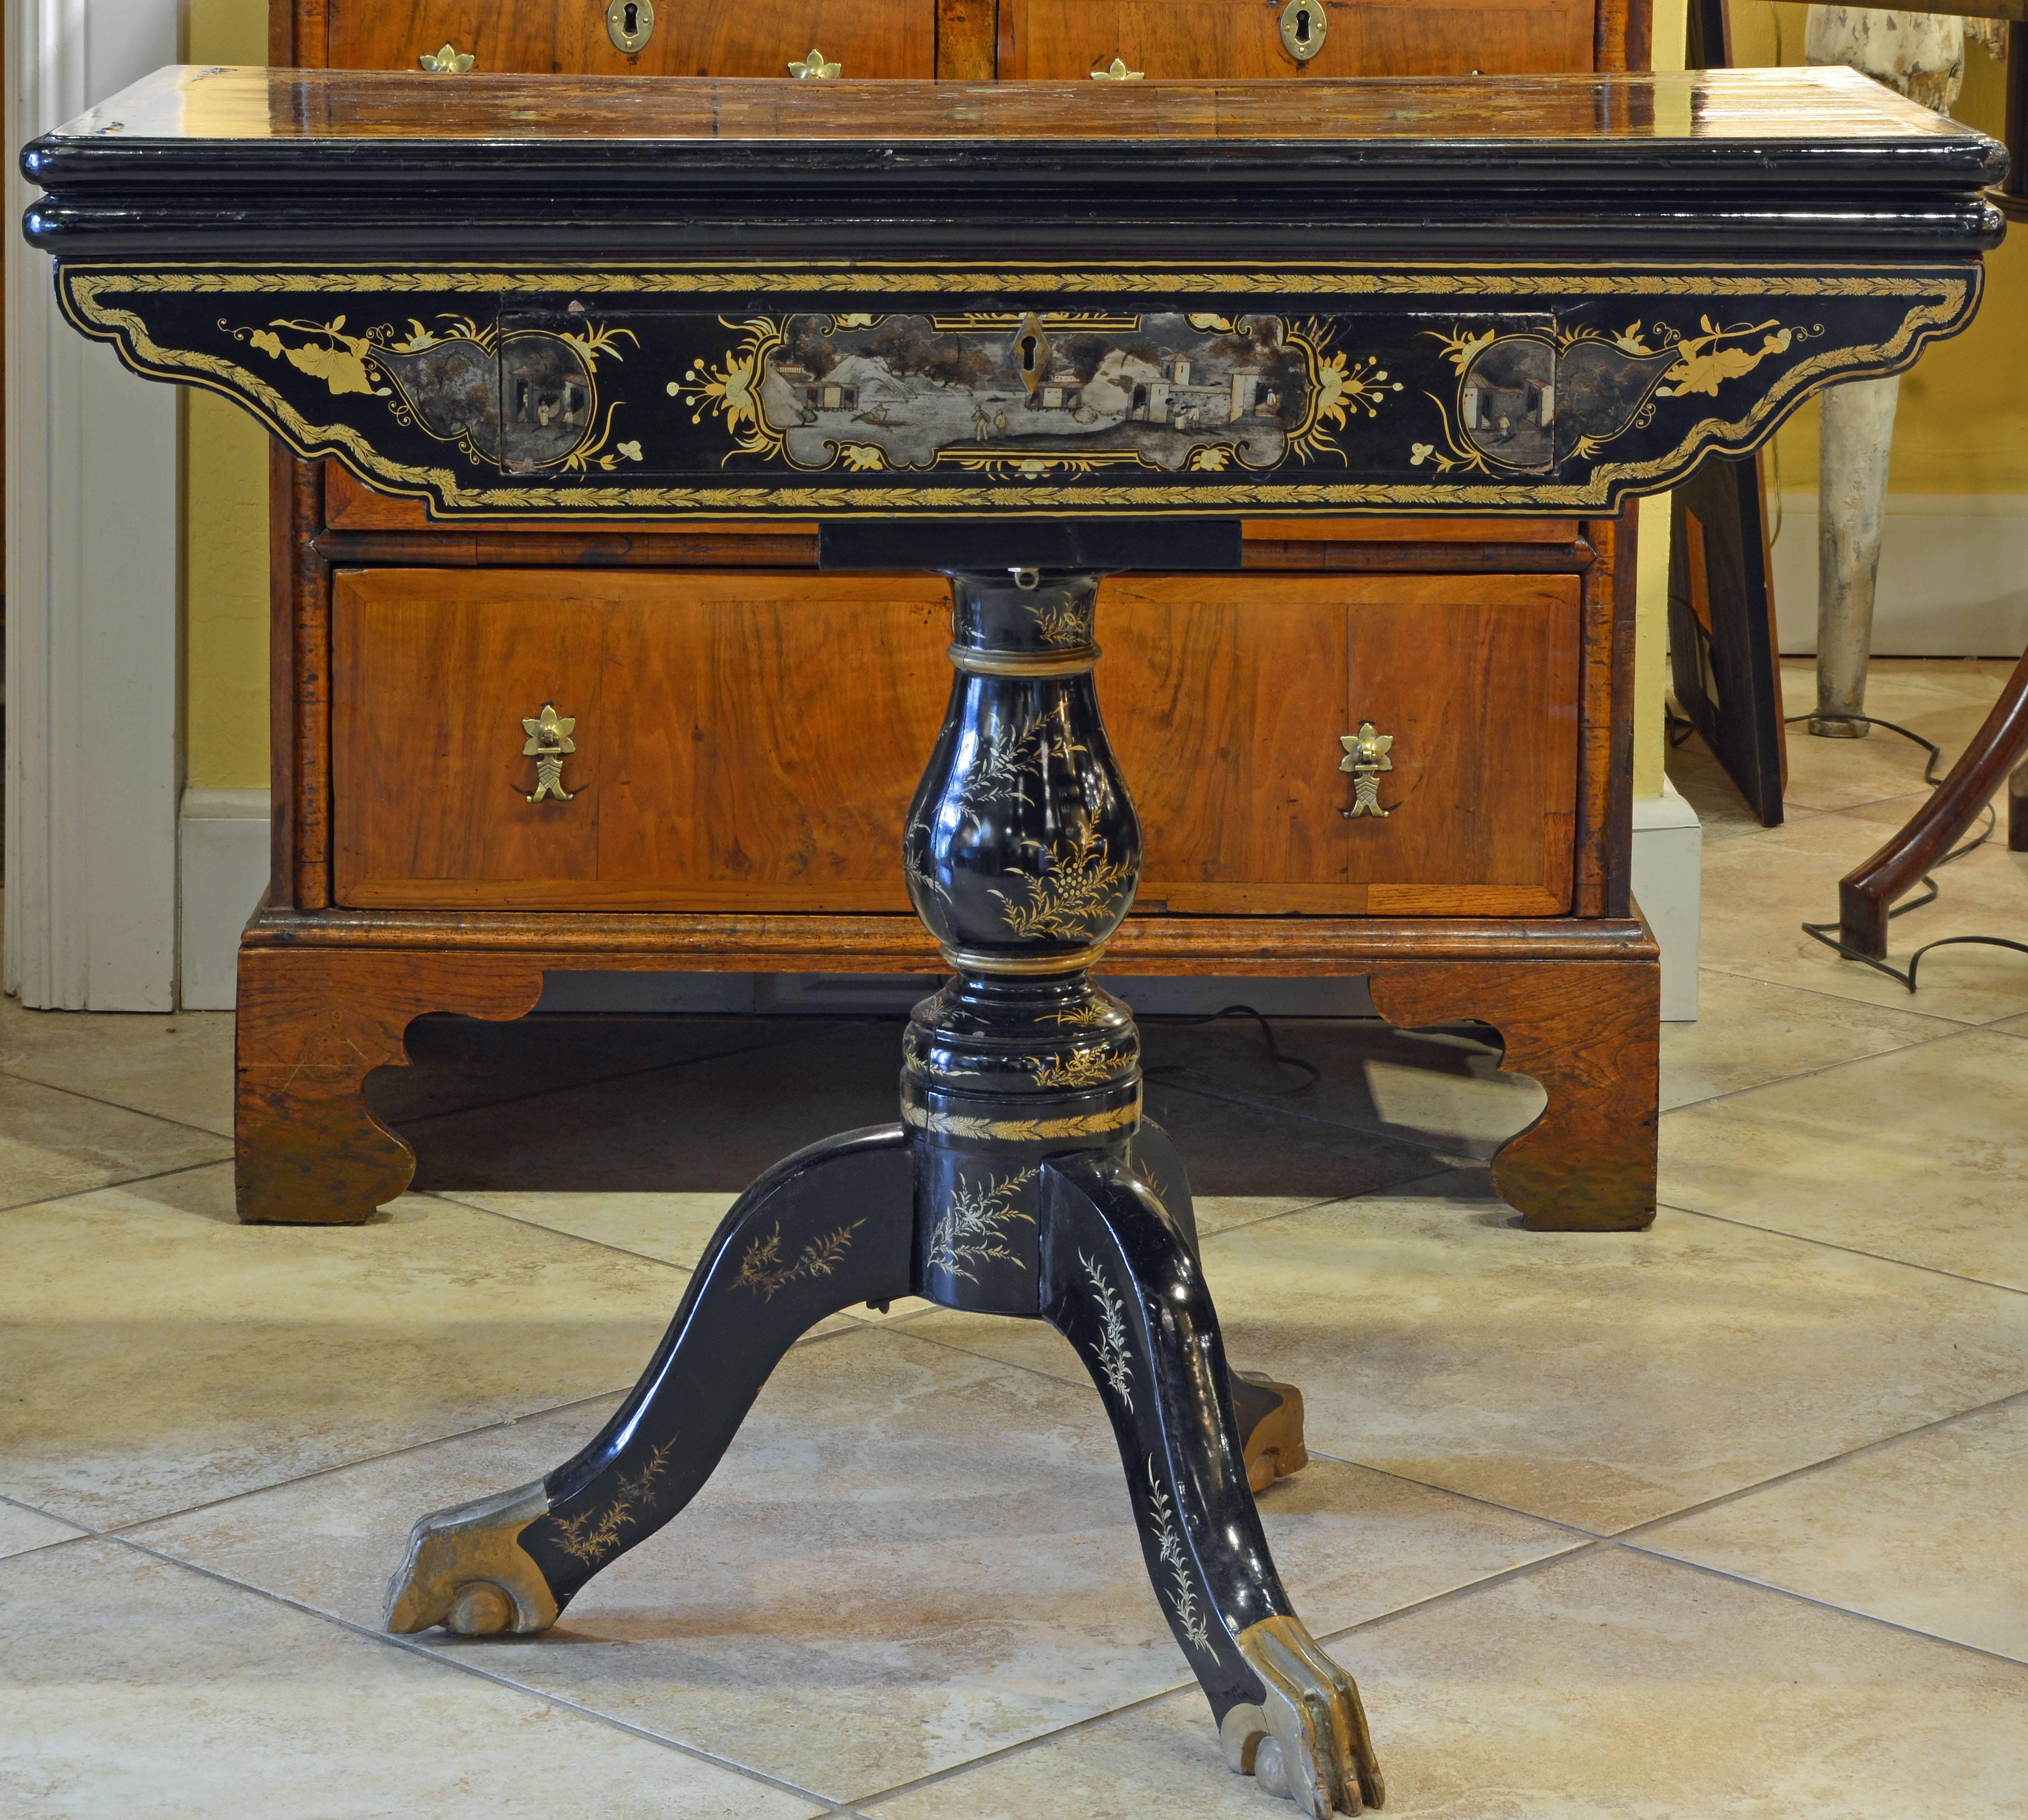 This black lacquer and gilt Chinese export game table features cartouches with stunning paintings of landscapes with people, buildings and boats rendered in a sophisticated and detailed manner. Under the top (which flips up and turns into full size)